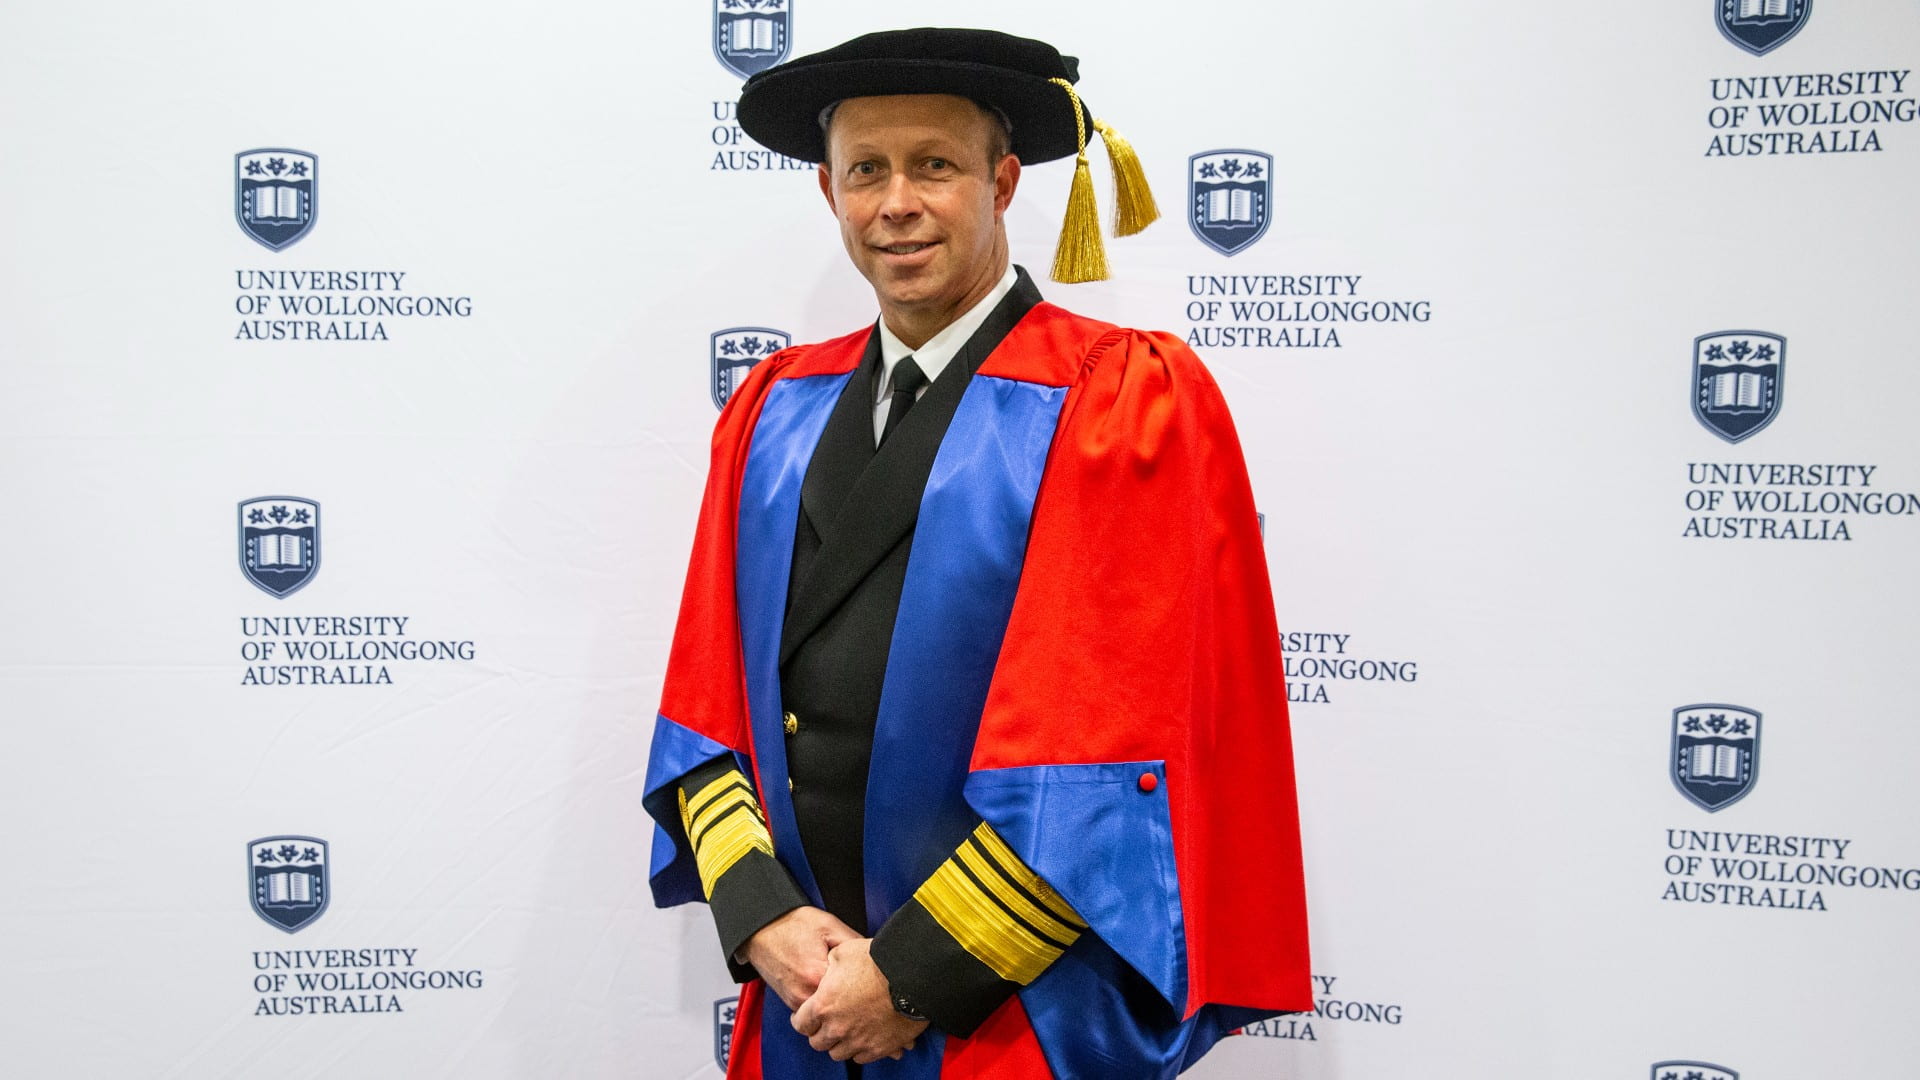 Honorary Doctorate awarded to distinguished Chief of Navy Australia